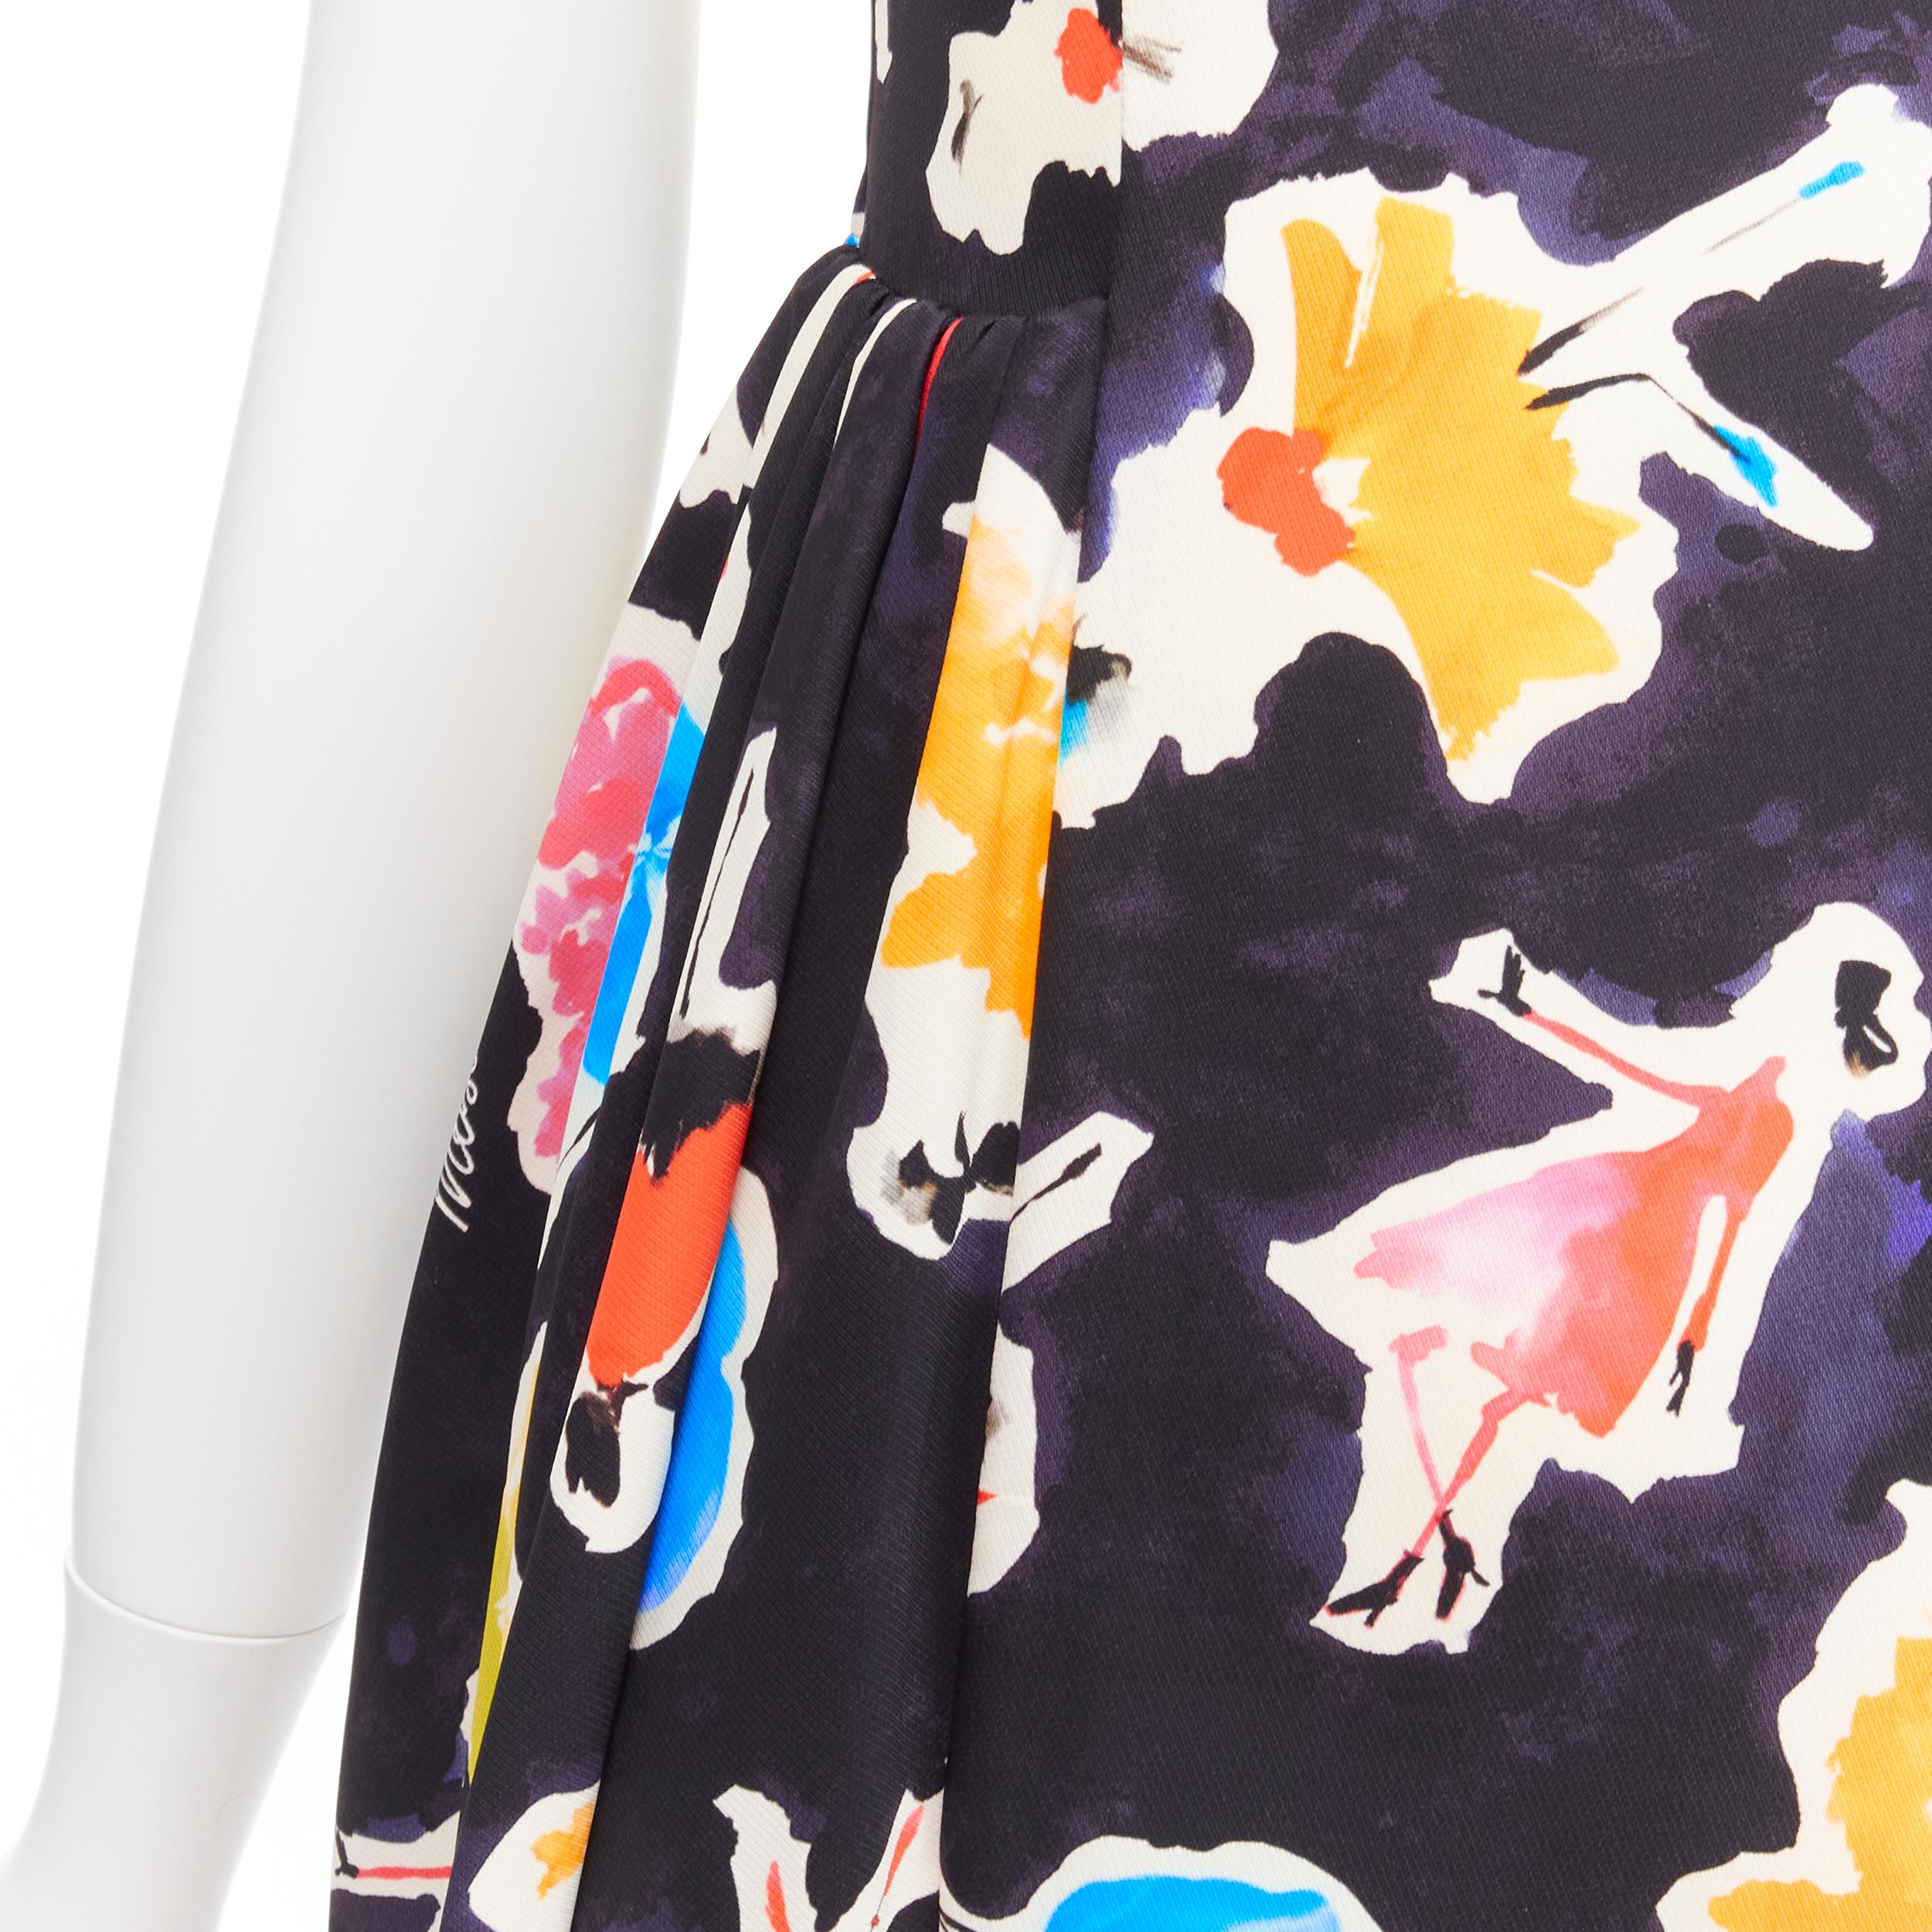 MOSCHINO Couture colorful logo watercolor print asymmetric cocktail dress IT38 XS
Reference: TGAS/D00237
Brand: Moschino
Material: Polyamide, Silk
Color: Multicolour
Pattern: Abstract
Closure: Zip
Extra Details: Back zip closure.
Made in: